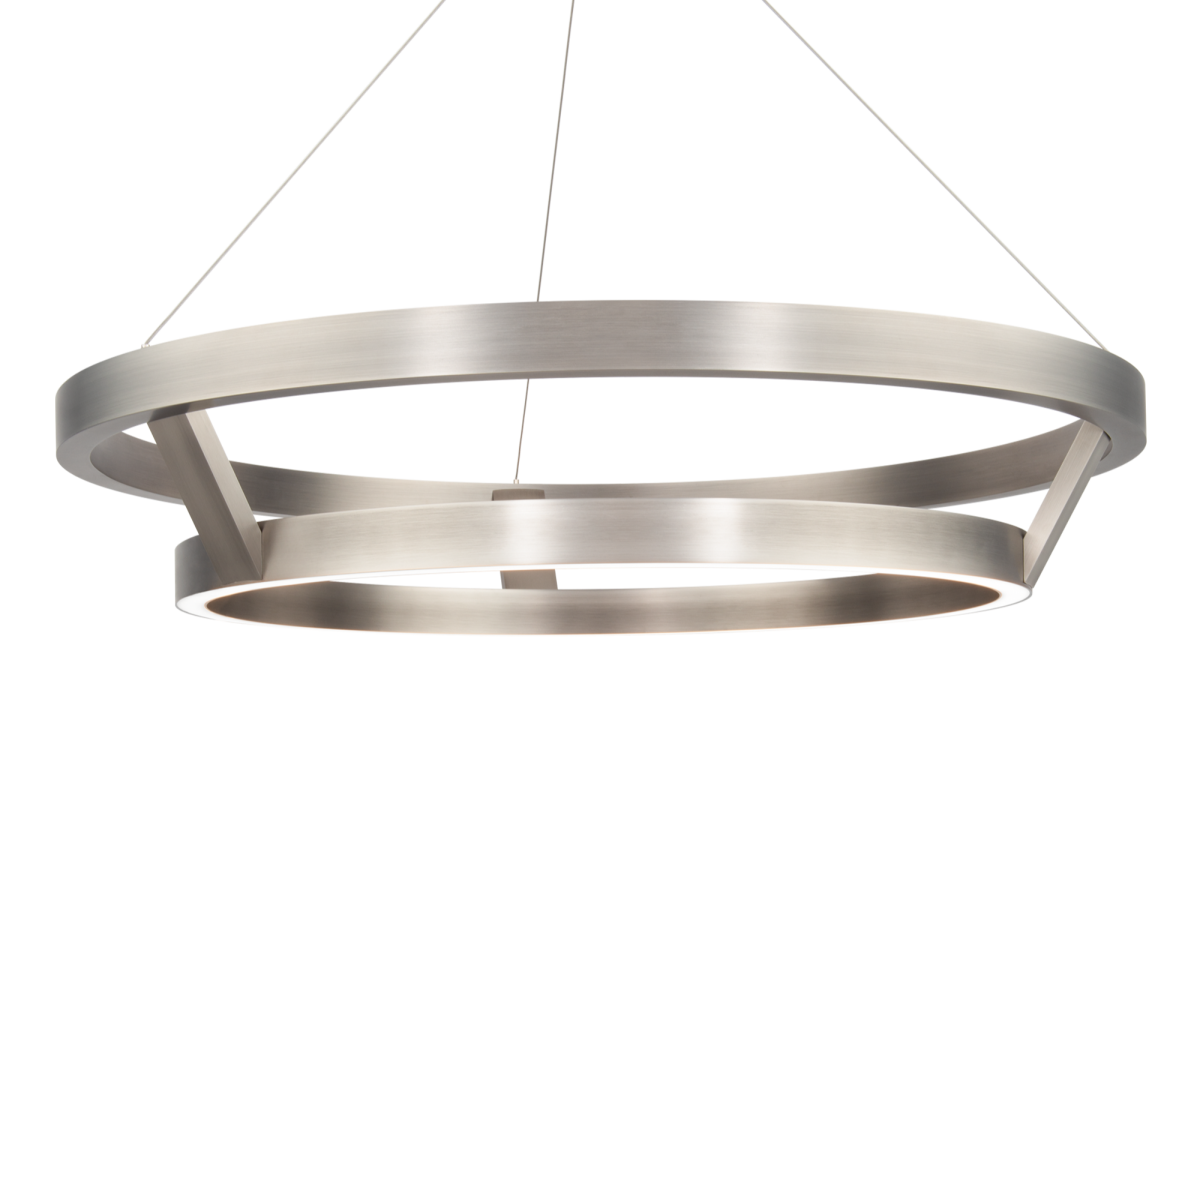 Modern Forms Imperial Chandelier Light Chandeliers Modern Forms Brushed Nickel 42x42x8.125 